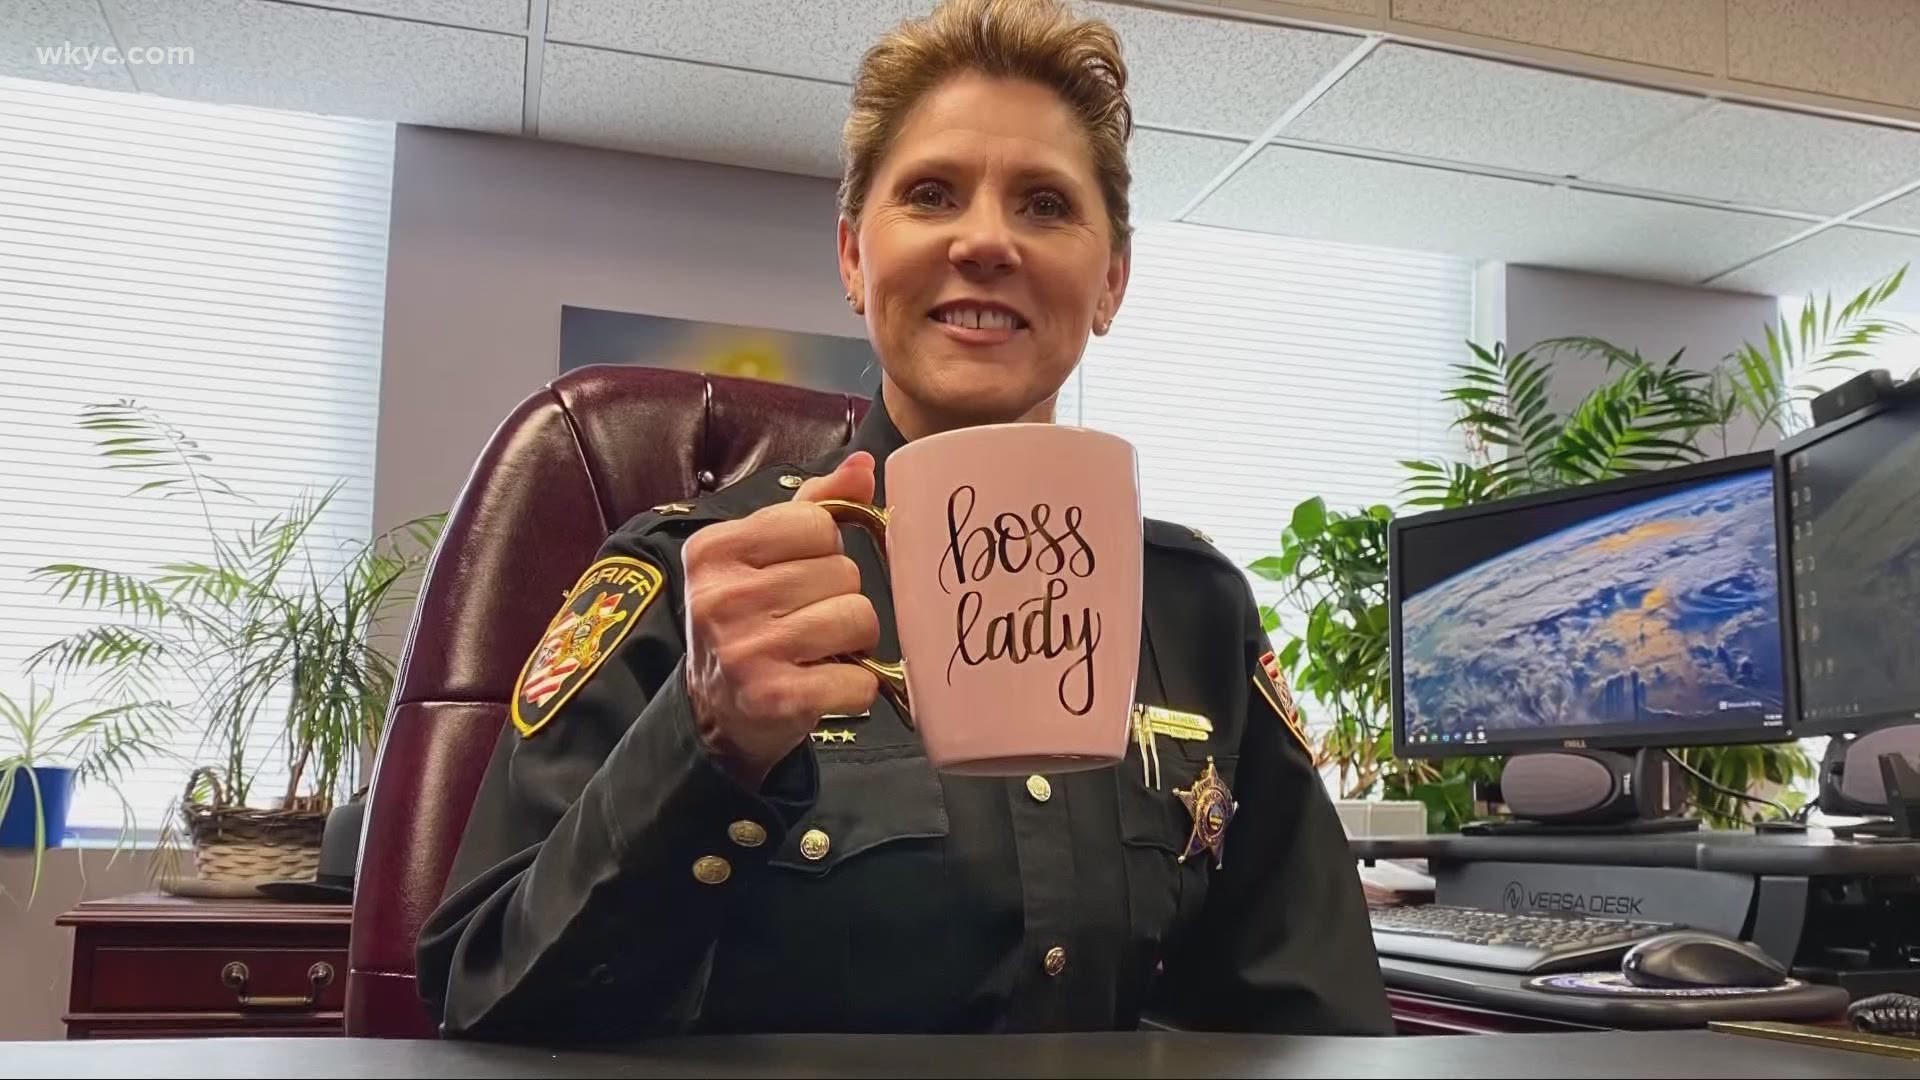 She is one of only six female sheriffs in the state of Ohio's history and one of less than 60 currently elected around the nation.